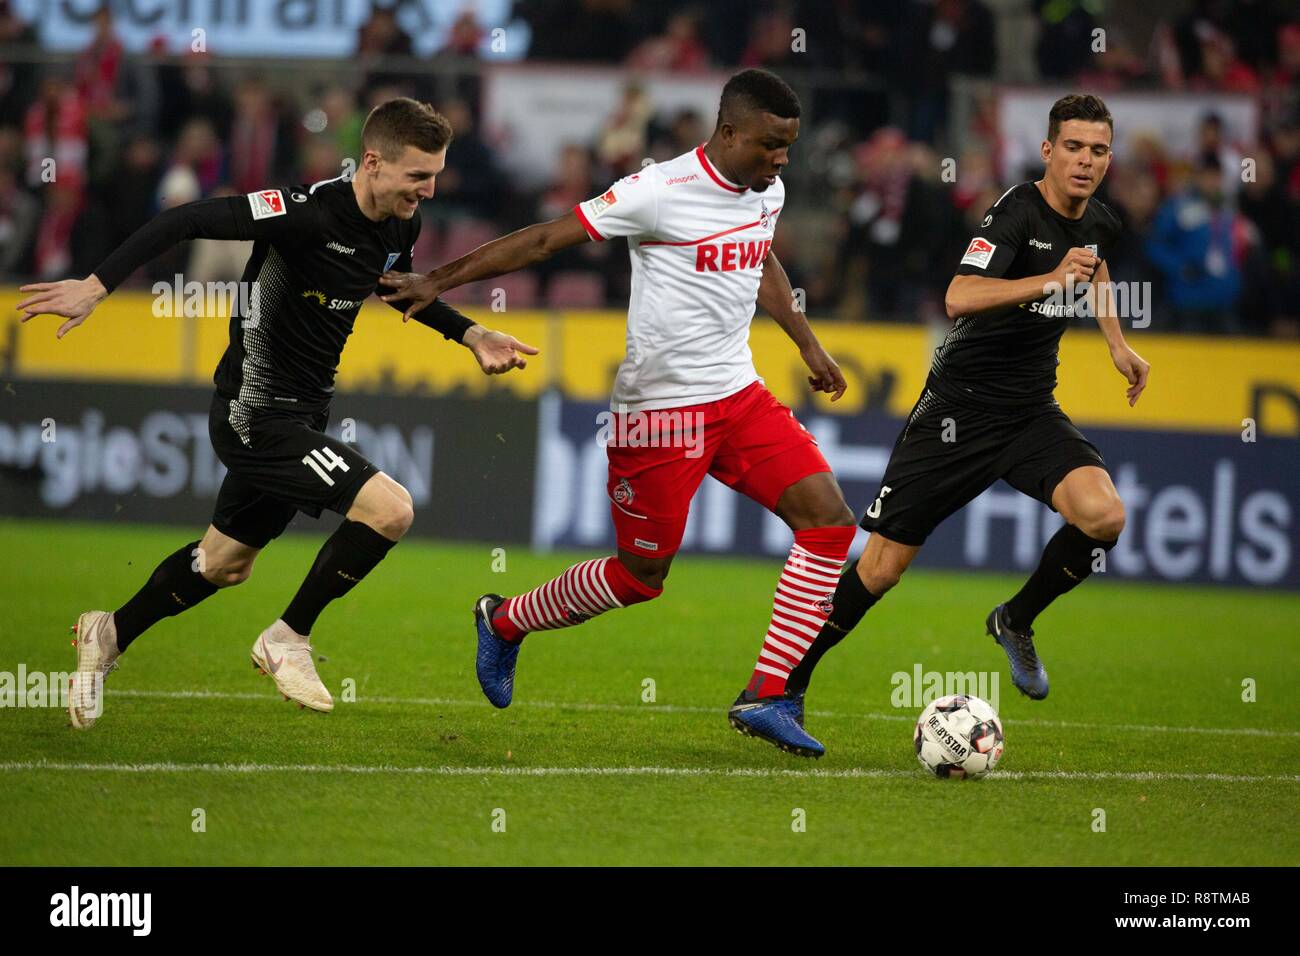 Cologne, Germany 17th December 2018, 2nd League, 1. FC Koeln vs 1. FC Magdeburg: Steffen Schaefer (Magdeburg), Jhon Cordoba (Koeln) in competition.   DFL REGULATIONS PROHIBIT ANY USE OF PHOTOGRAPHS AS IMAGE SEQUENCES AND/OR QUASI-VIDEO             Credit: Juergen Schwarz/Alamy Live News Stock Photo